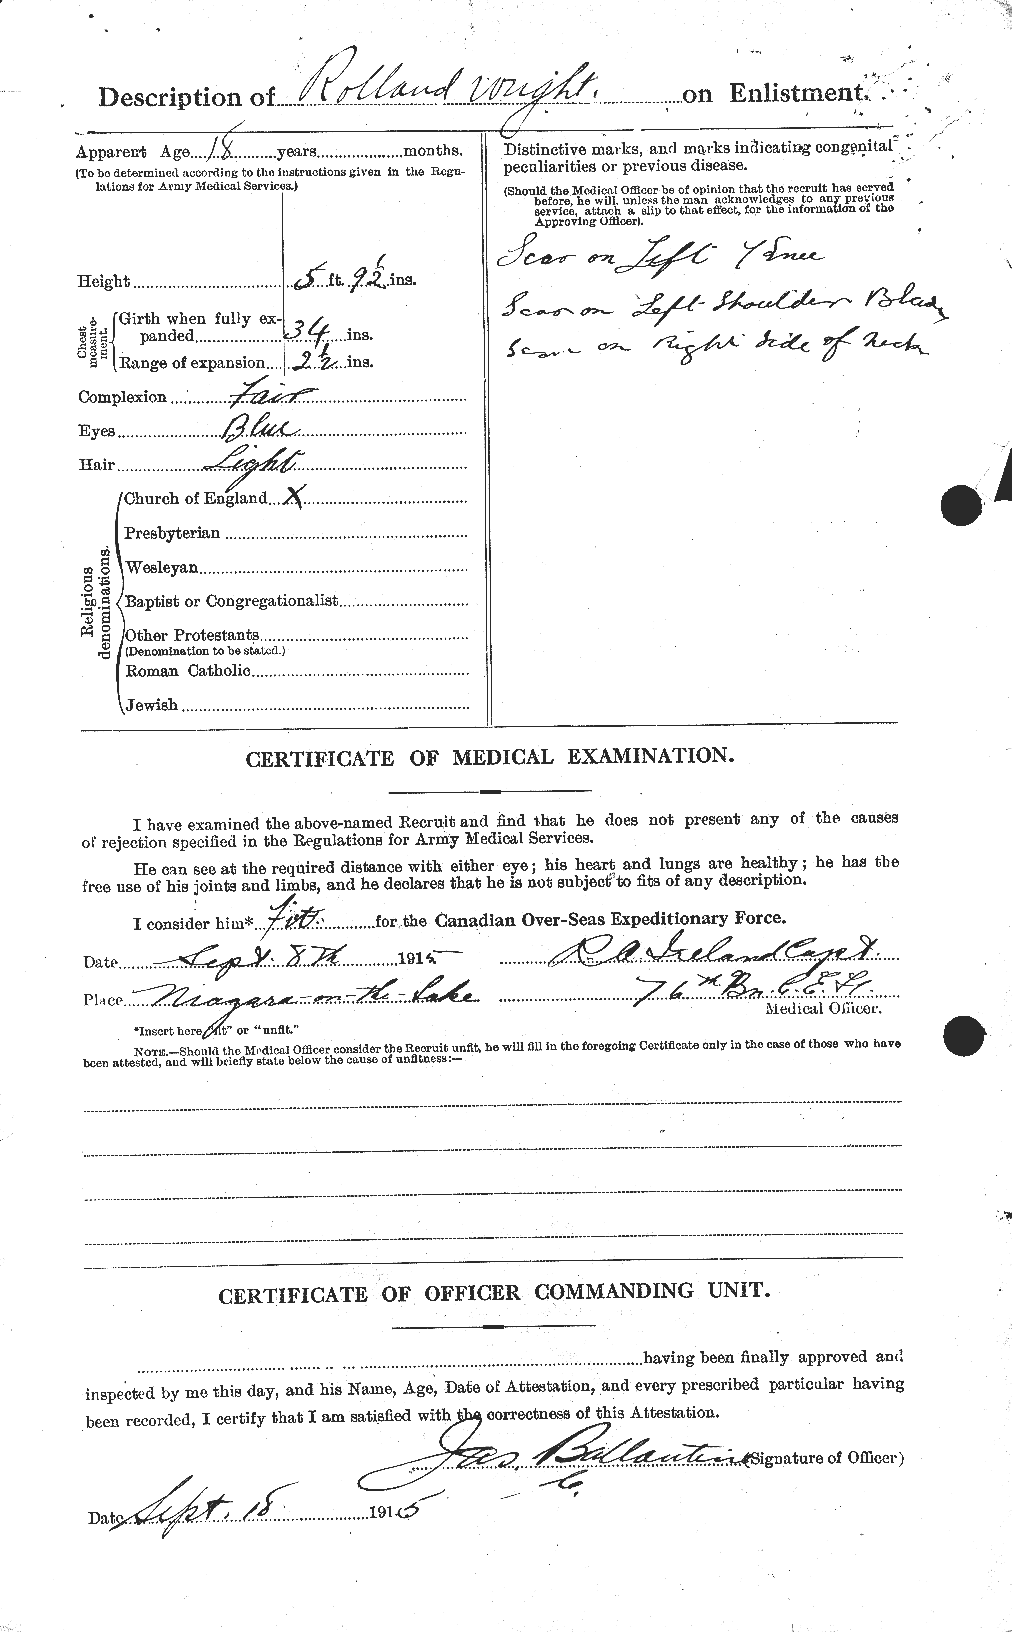 Personnel Records of the First World War - CEF 688525b